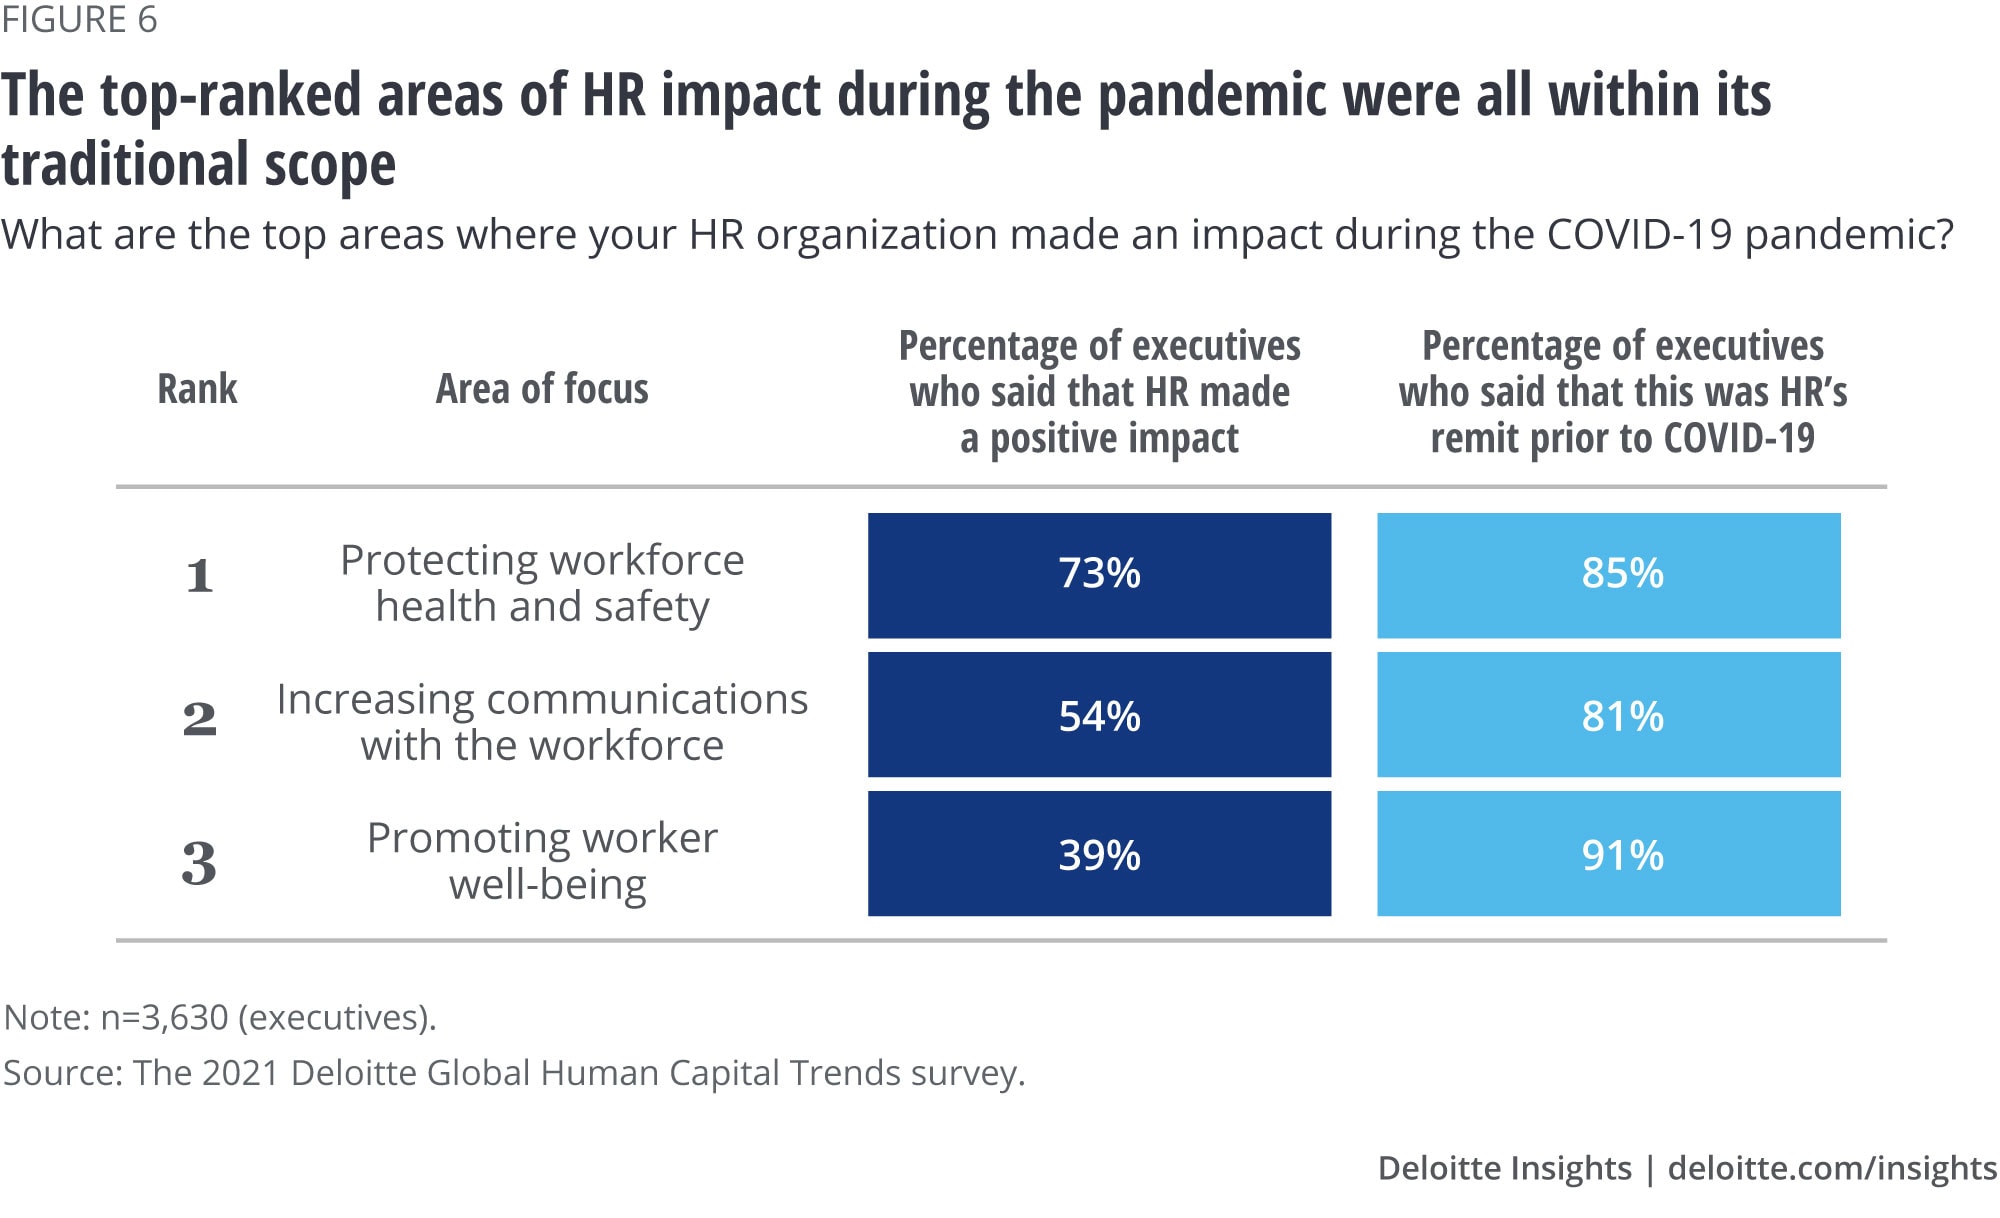 The top-ranked areas of HR impact during the pandemic were all within its traditional scope